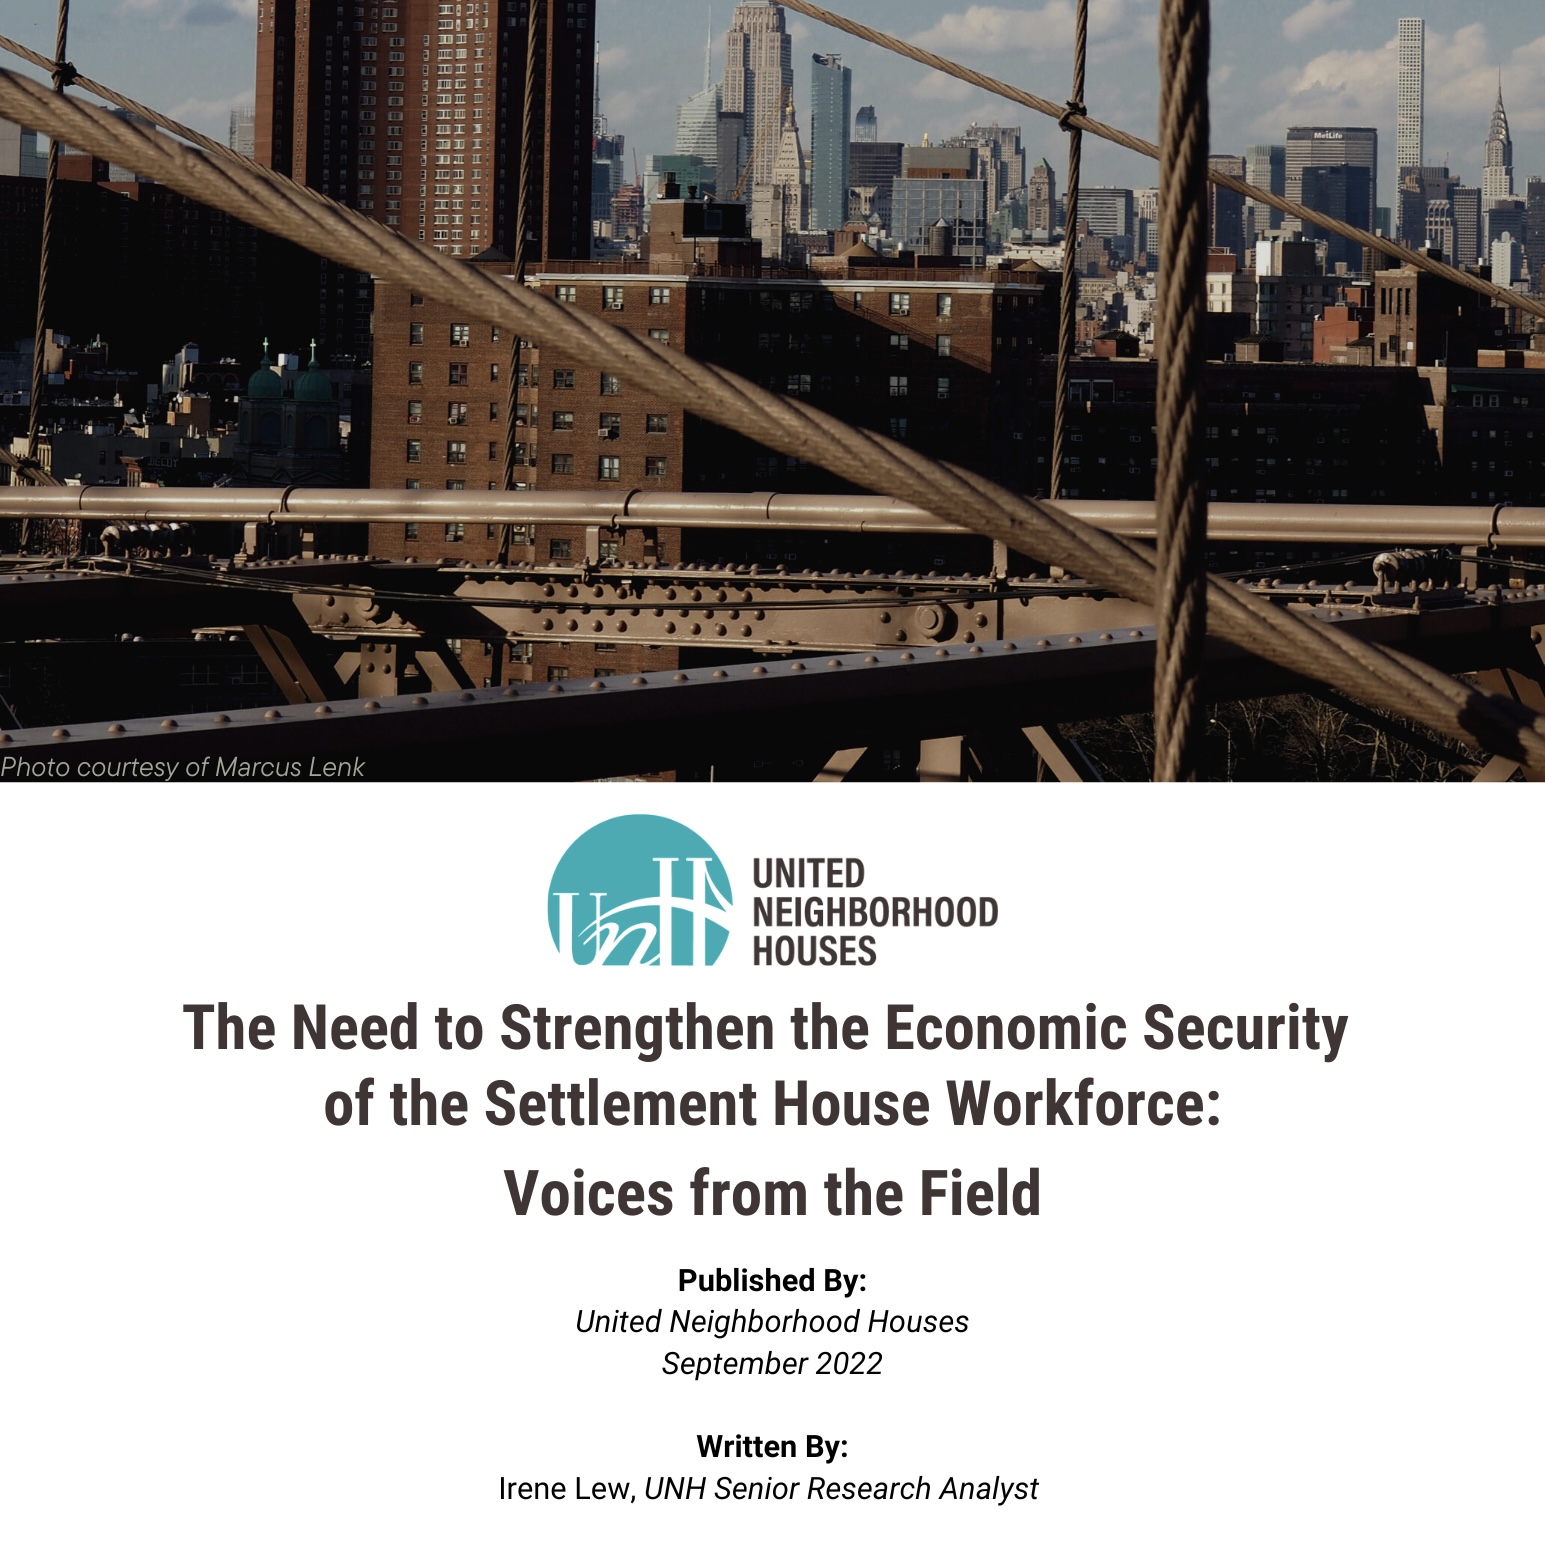 The Need to Strengthen the Economic Security of the Settlement House Workforce: Voices from the Field